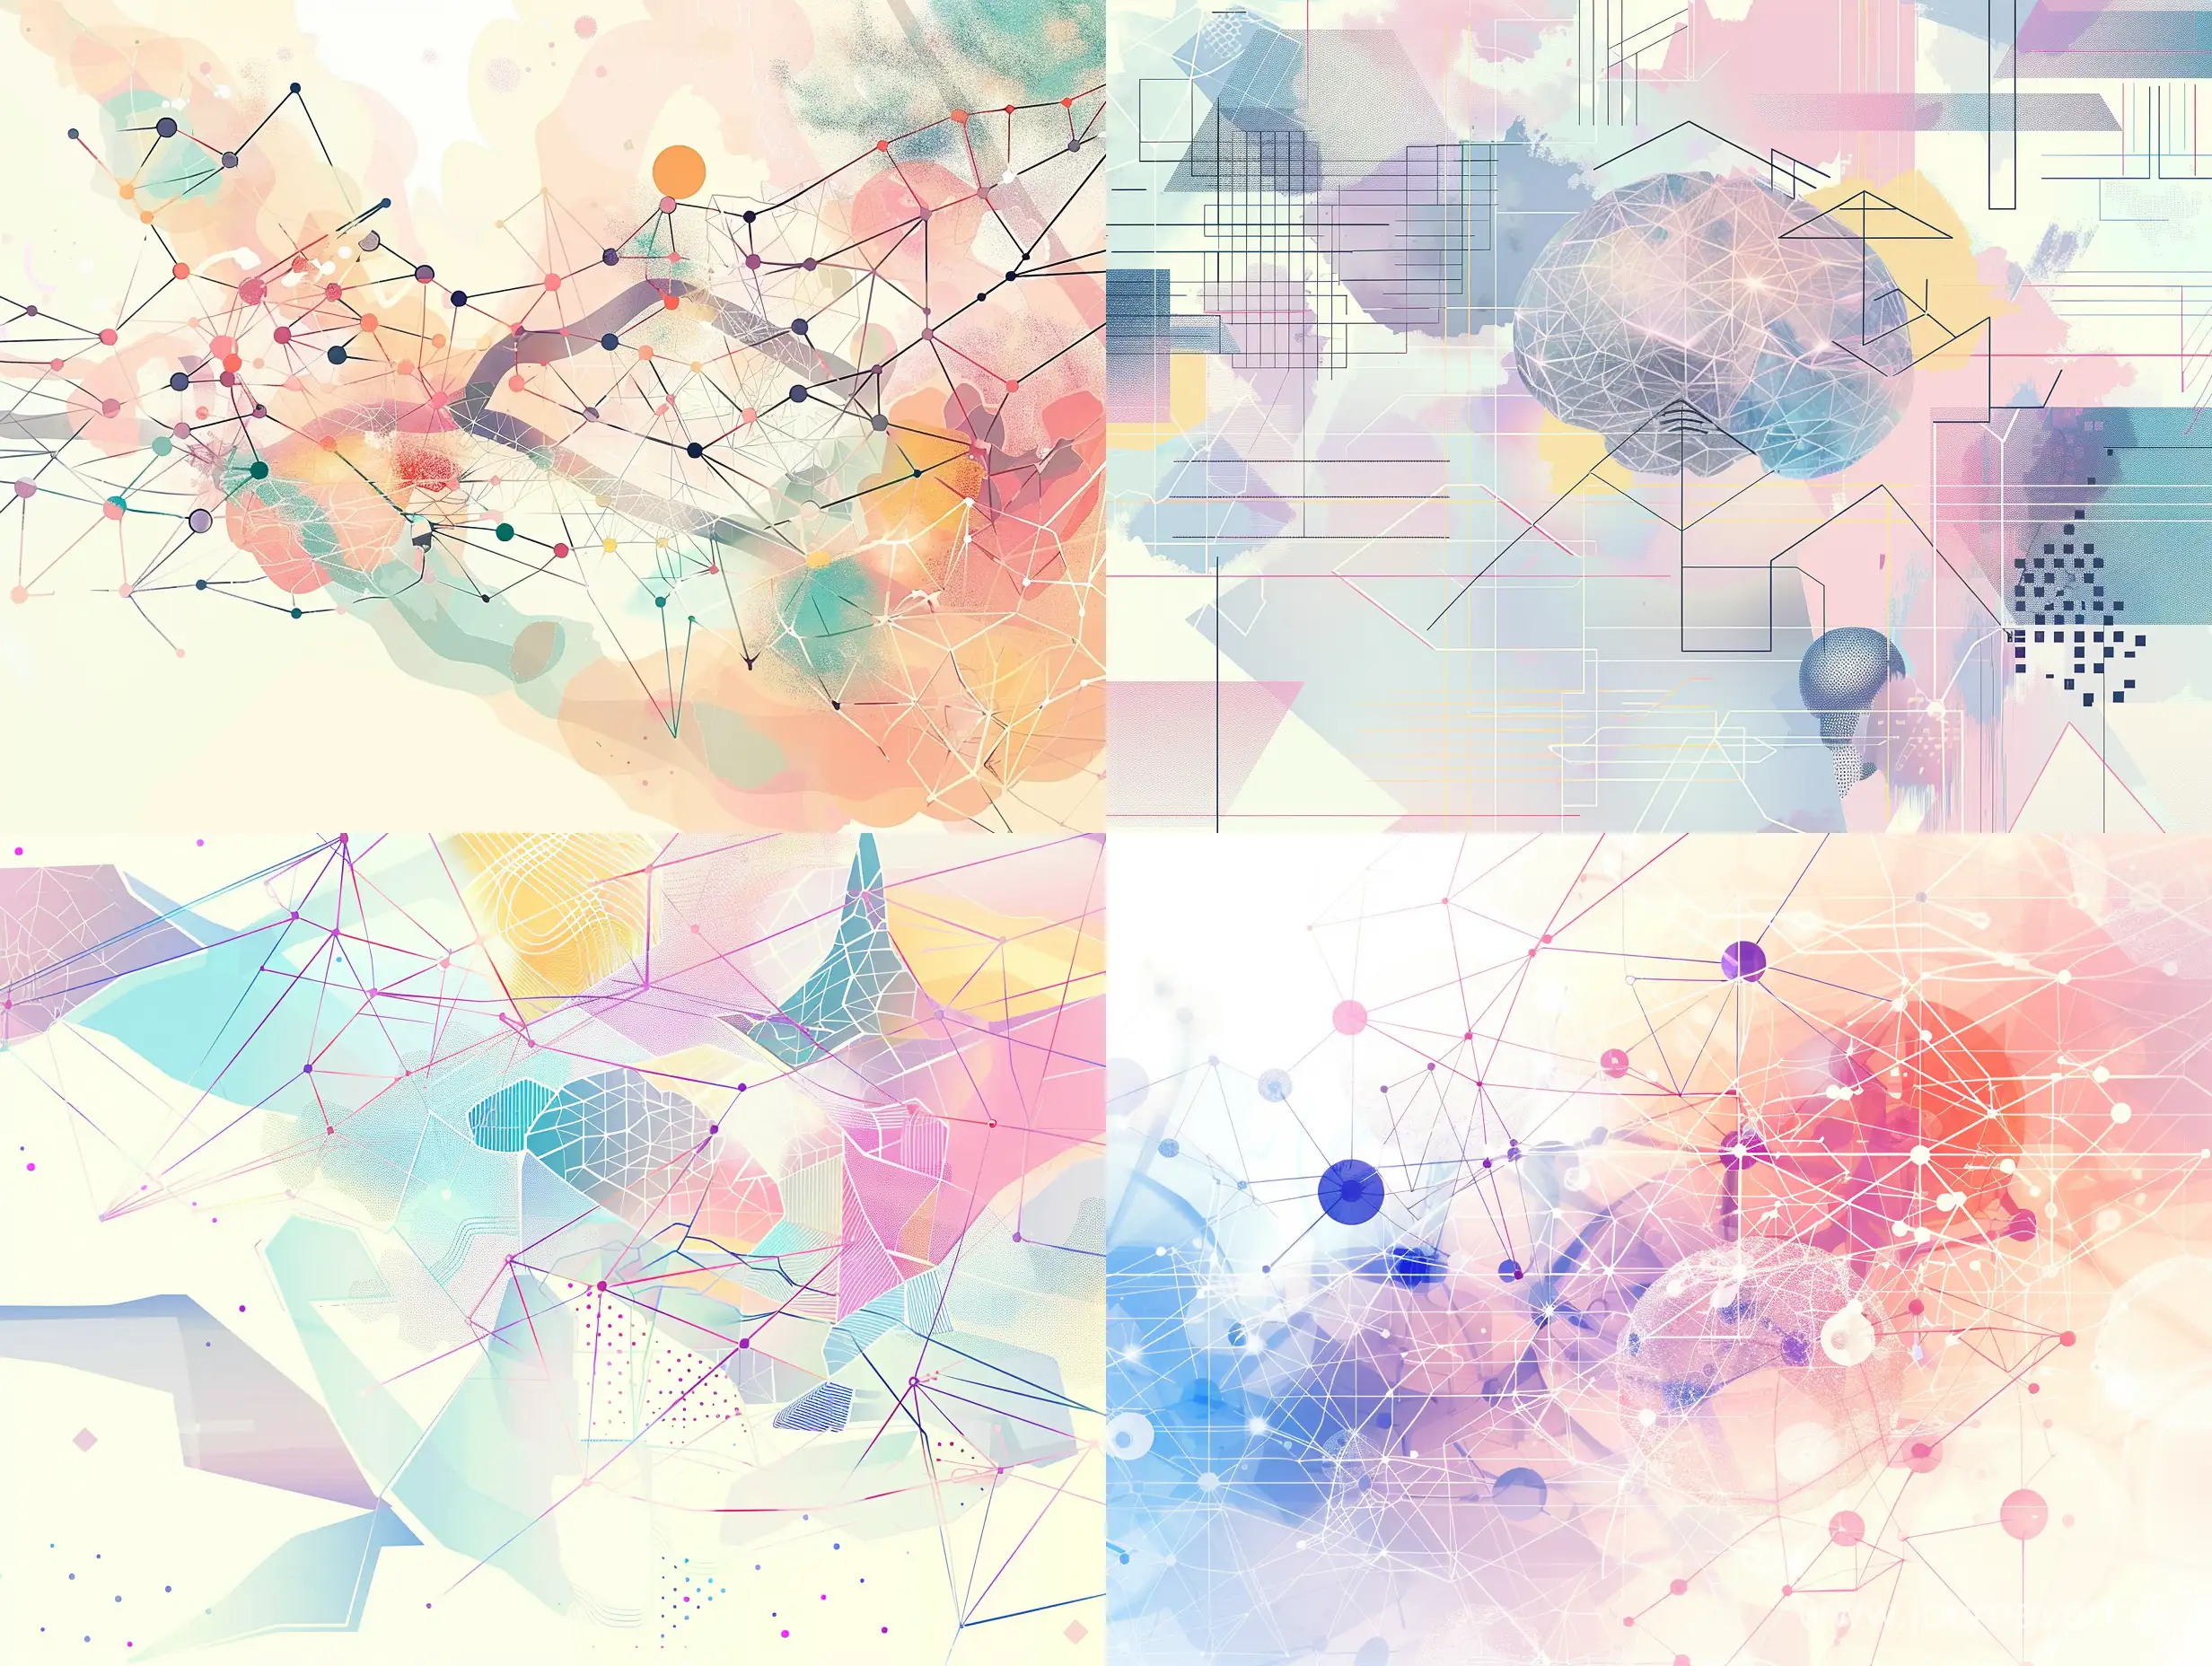 Innovative-Neural-Network-Technologies-in-Soft-Pastel-Tones